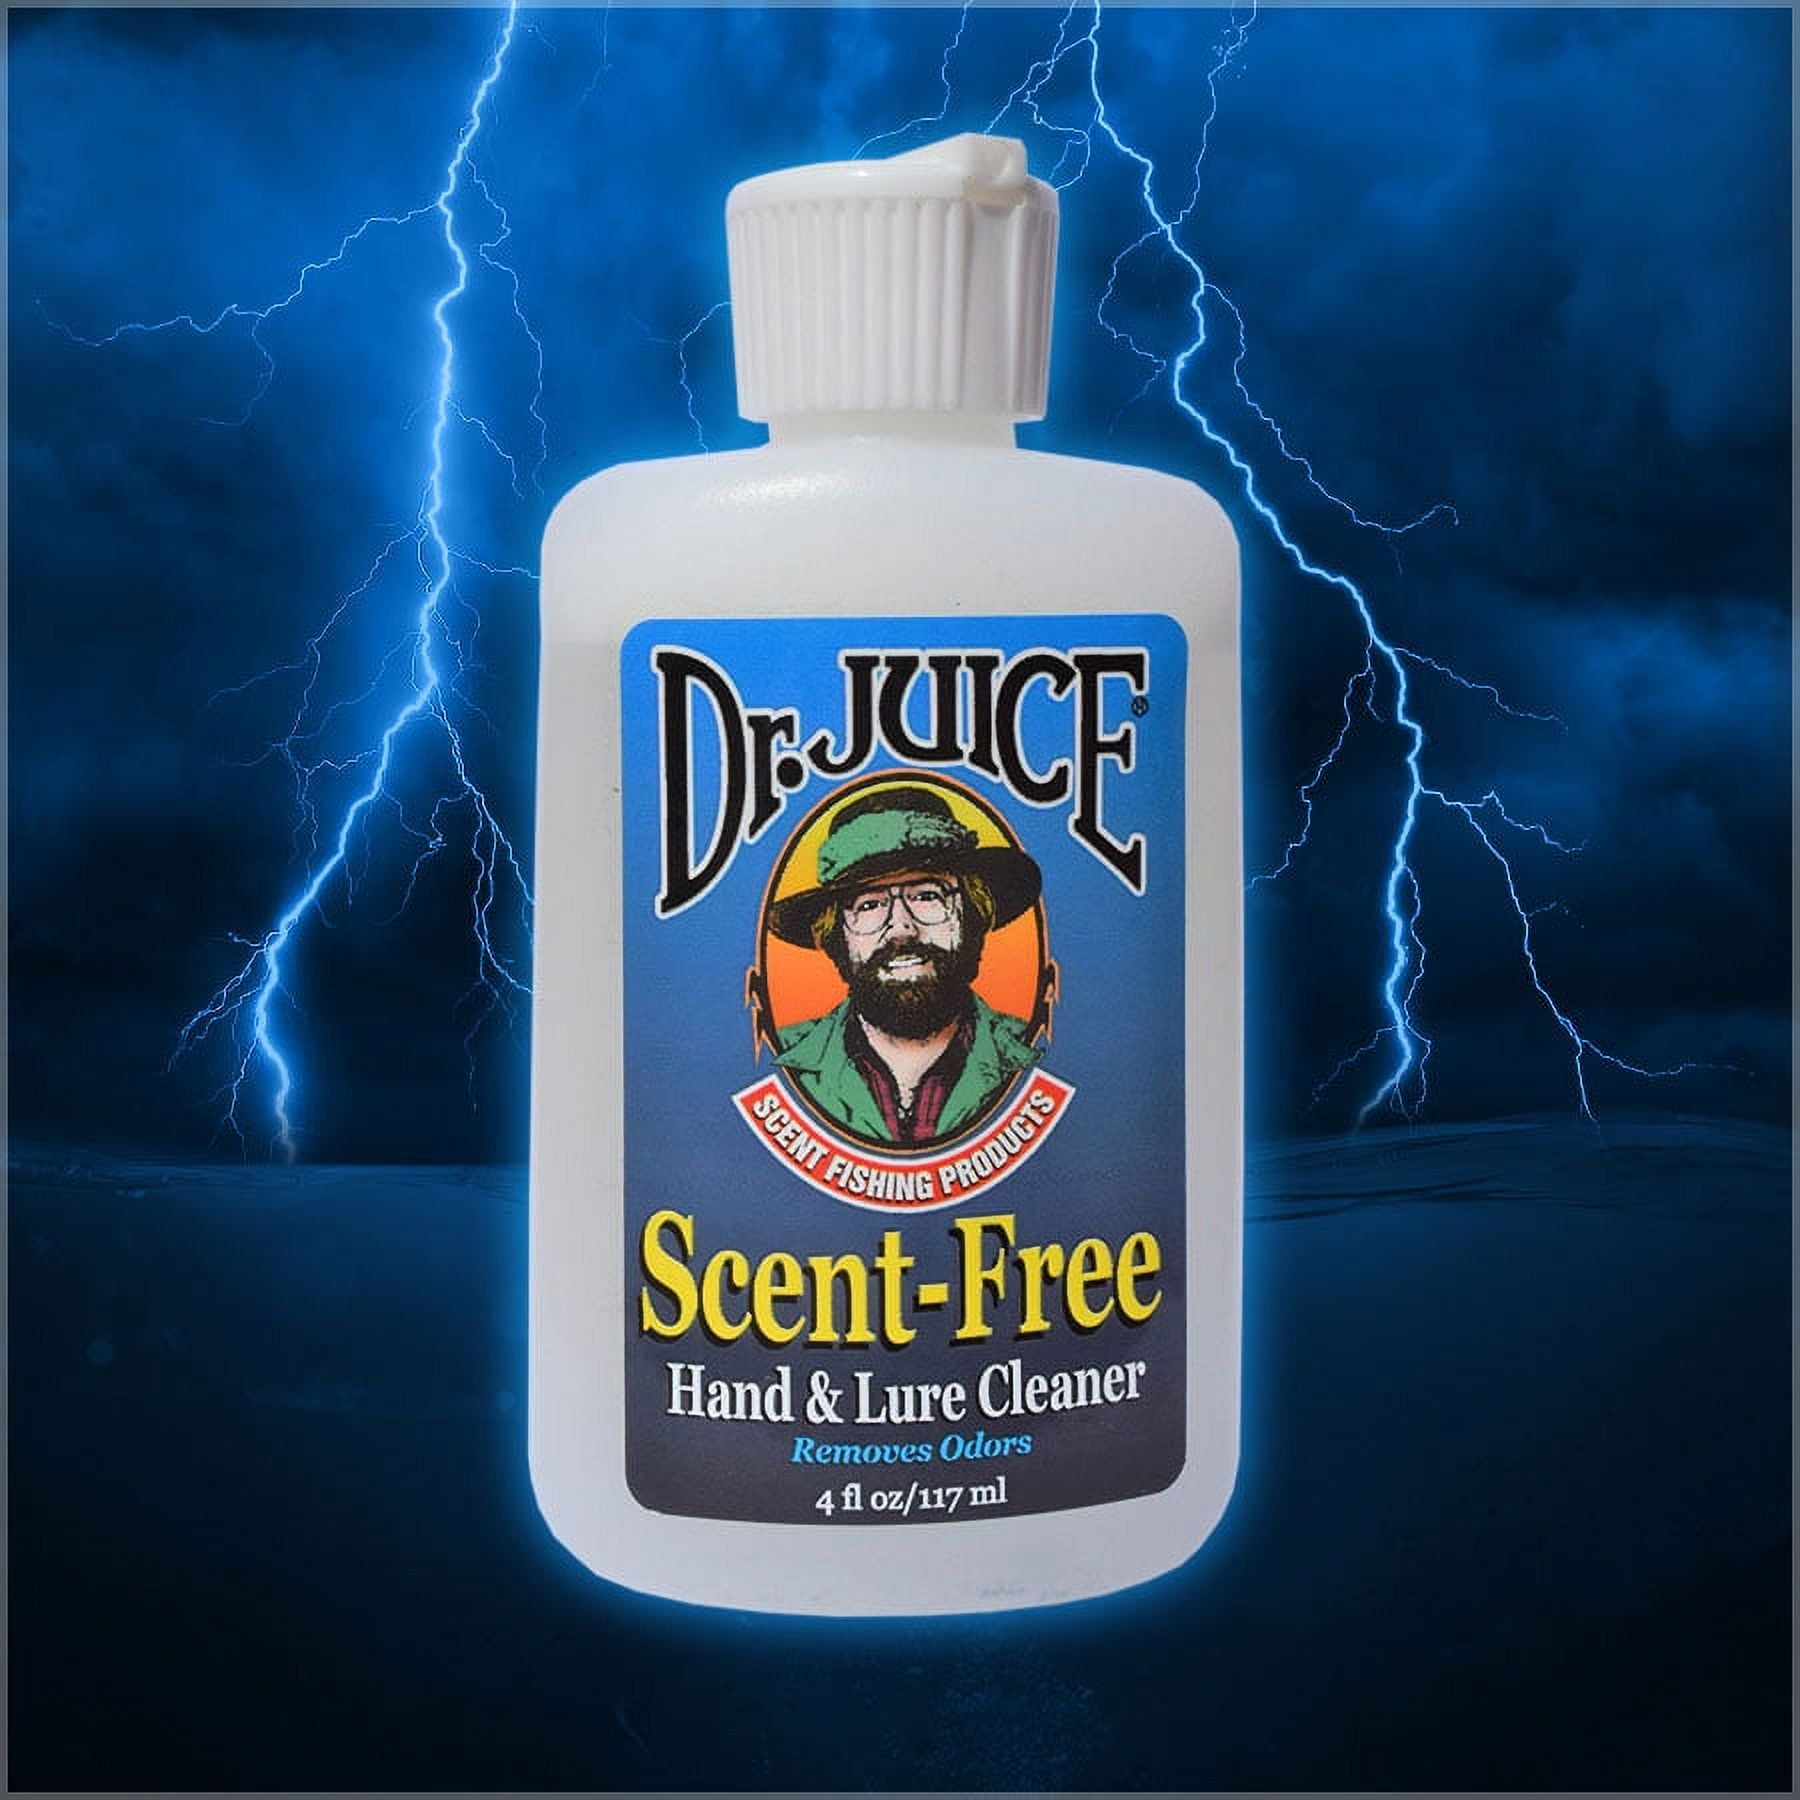 Fishing with DR JUICE Fish Scents in SOUTH FLORIDA! (Saltwater